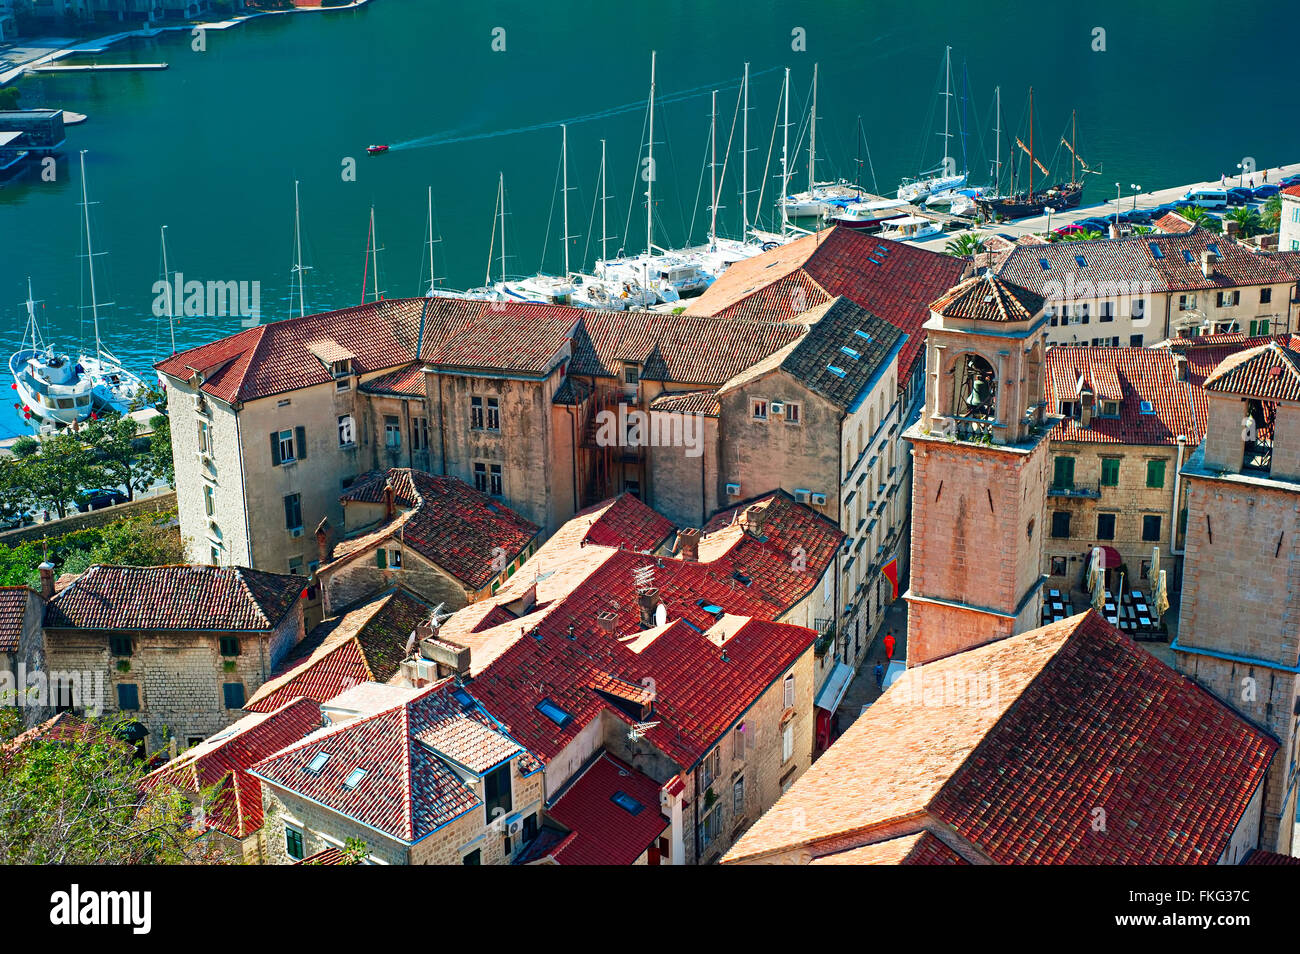 Aerial view of Old Town of Kotor, Montenegro - UNESCO World Heritage Sight Stock Photo